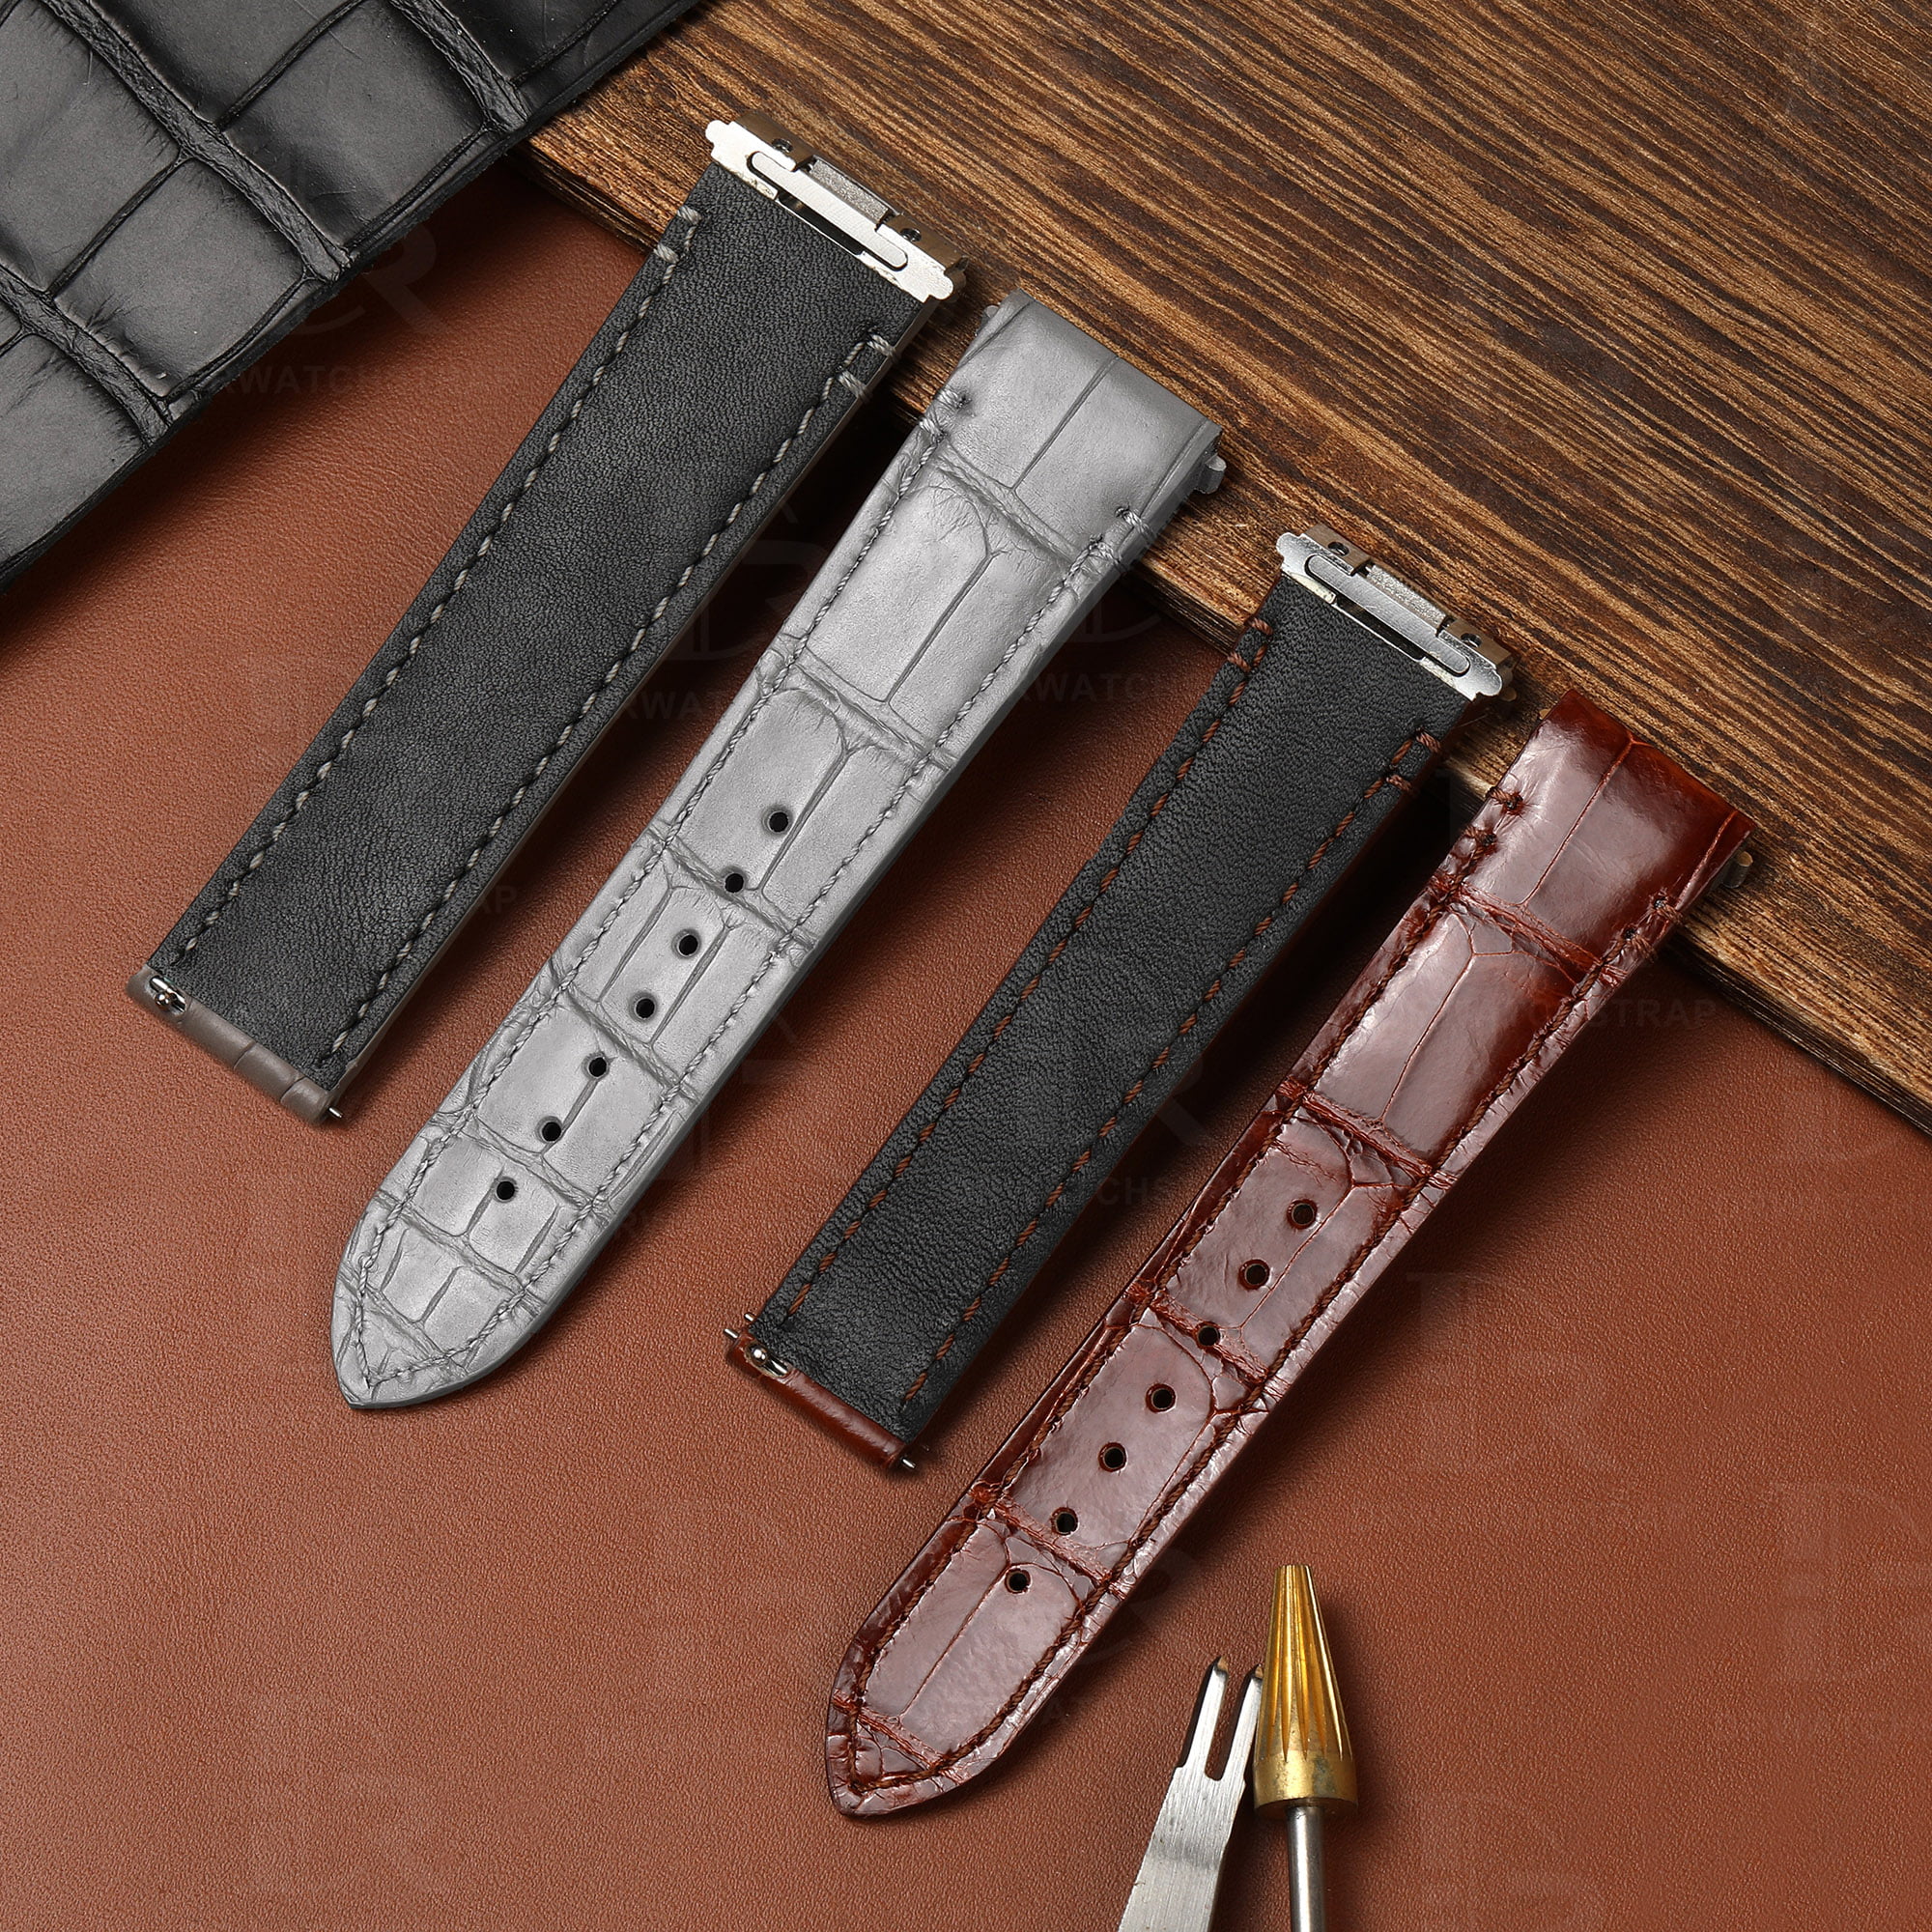 Quickswitch Grey leather watch strap replacement for Cartier Santos watch